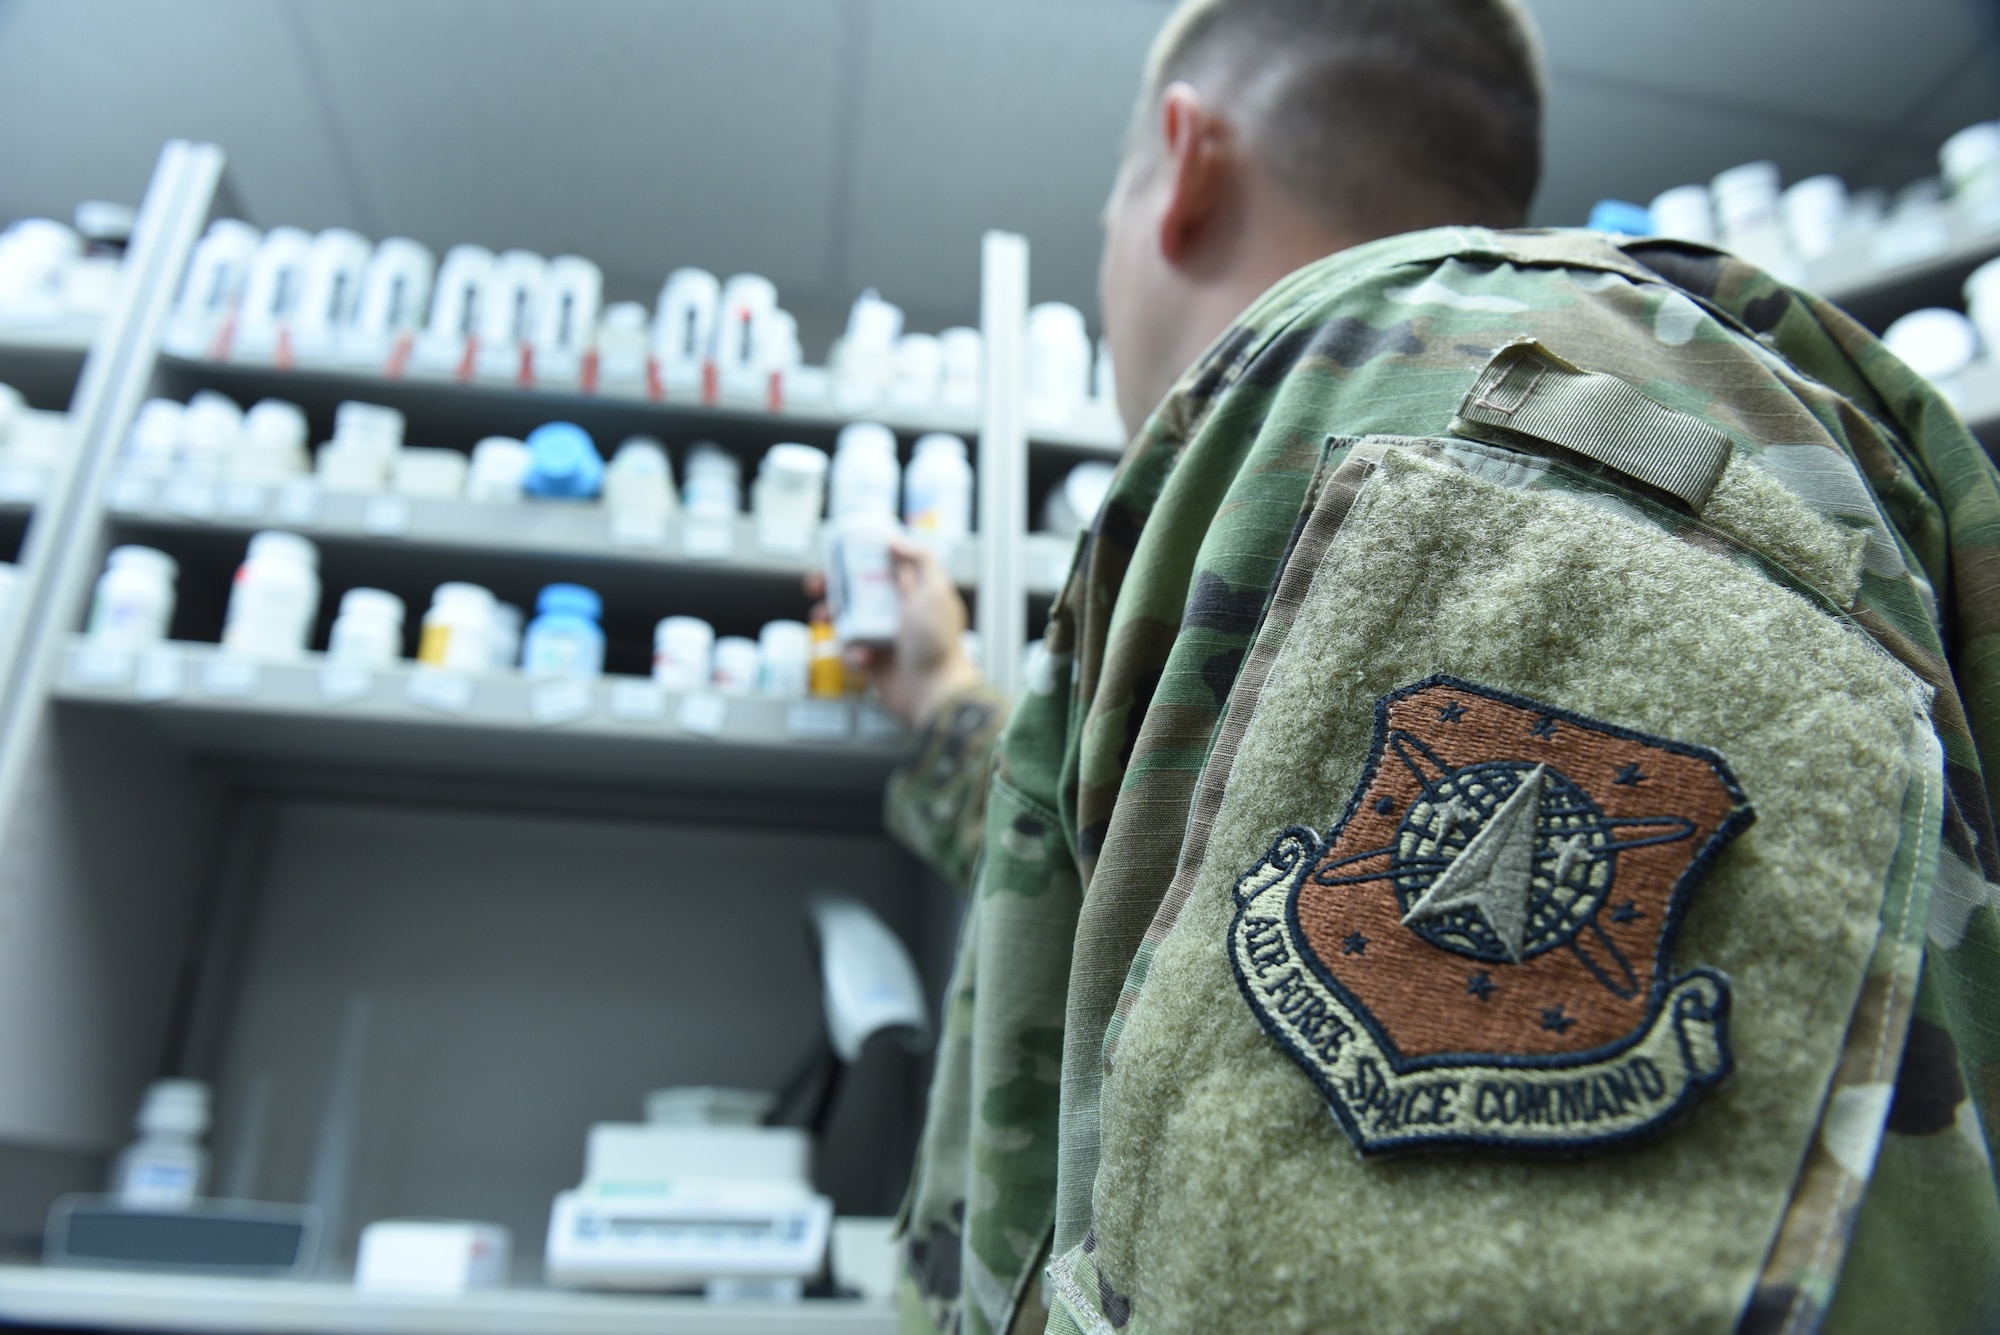 An Airman with the 21st Medical group checks a prescription at the Schriever Air Force Base, Colorado, pharmacy Sept. 11, 2019. Airmen who are part of the 21st Medical Group will become integrated with the Defense Health Agency beginning Oct. 1, which has the four-part aim of improved readiness, better health, better care and lower costs. (U.S. Air Force photo by Master Sgt. Brian Bender)